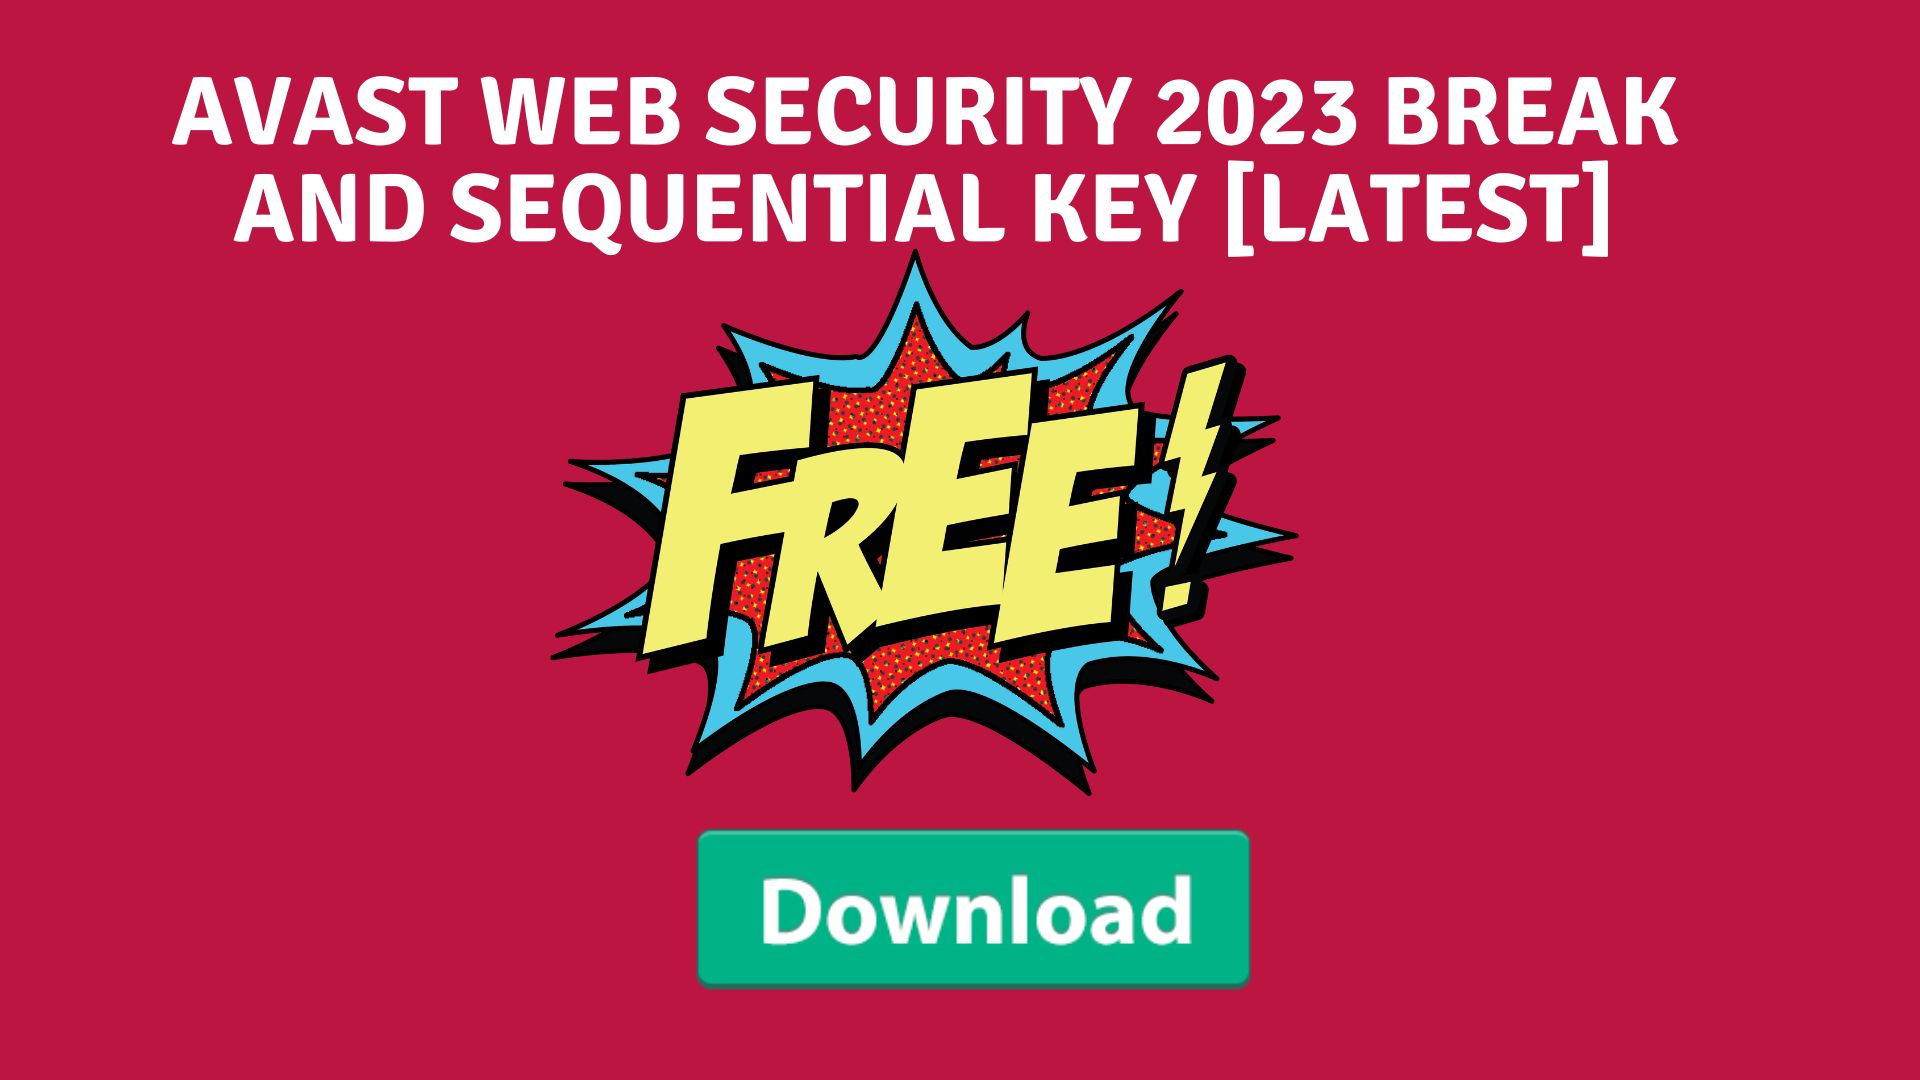 Avast web security 2023 break and sequential key [latest]